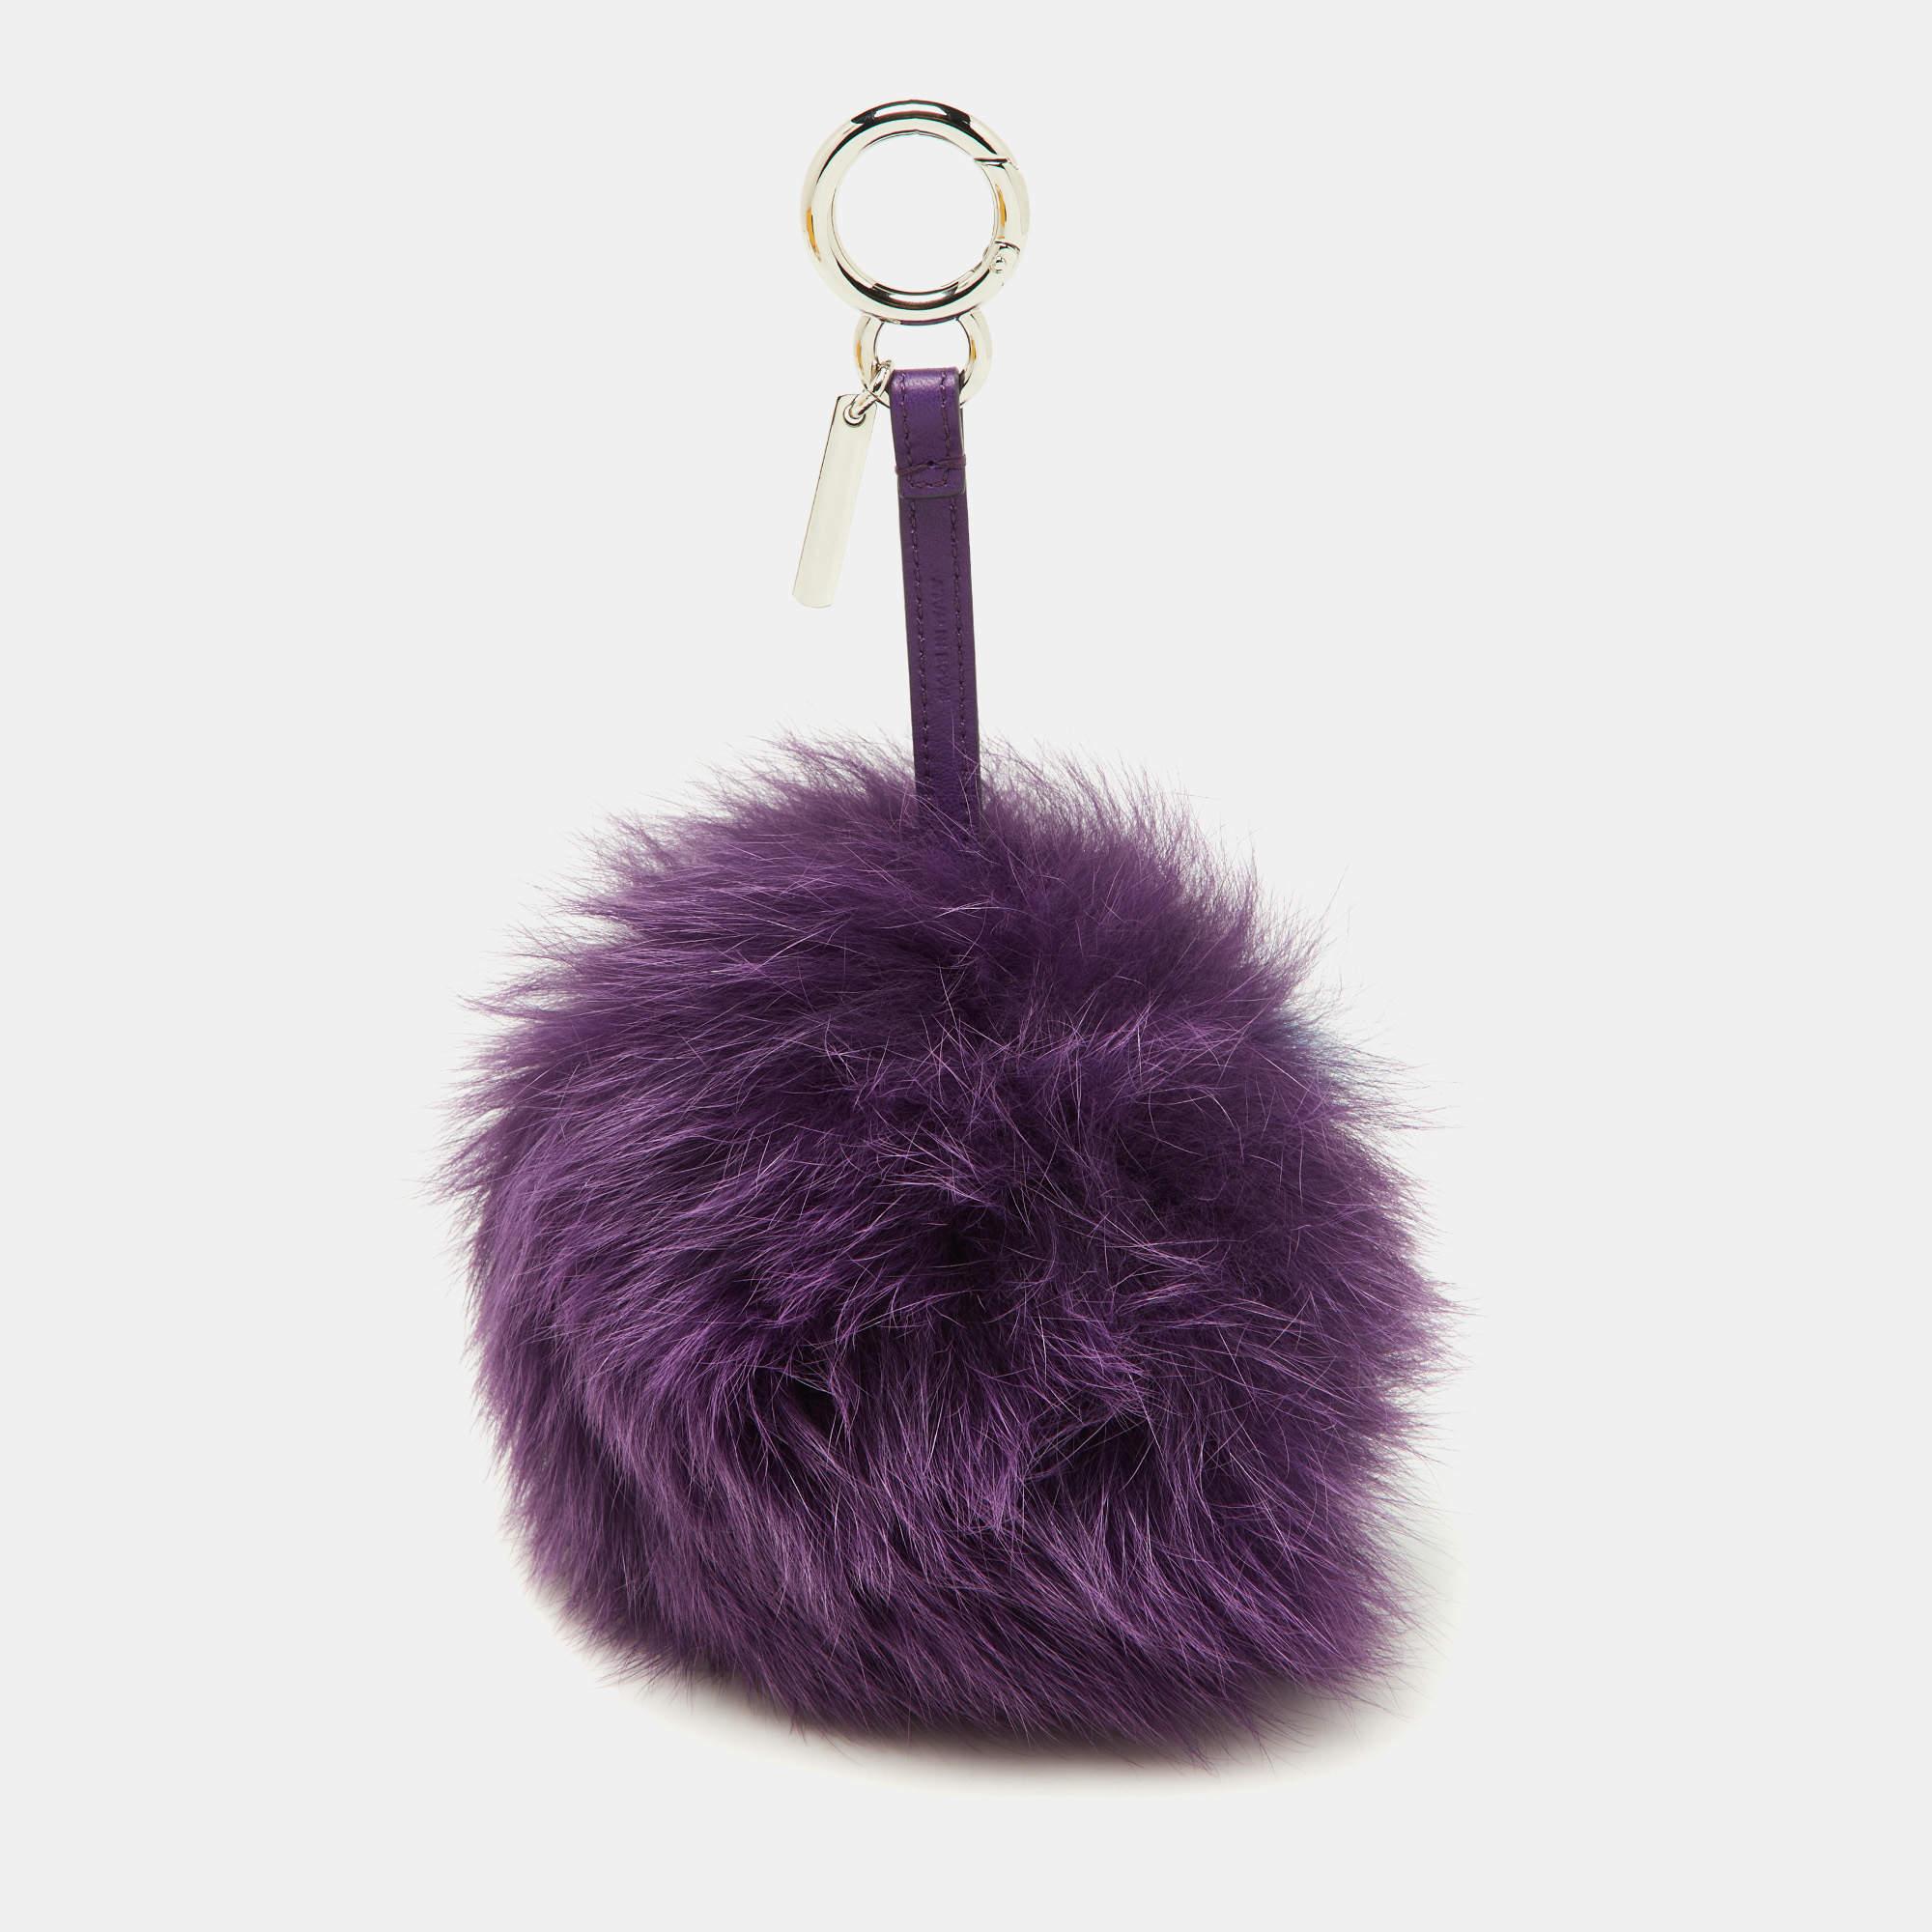 Fendi brings you this pretty bag charm that has caught the eye of handbag lovers around the world. The charm consists of a pom pom made from fox fur and held by a leather strap with a silver-tone clasp. Adorn your precious bags with this Fendi